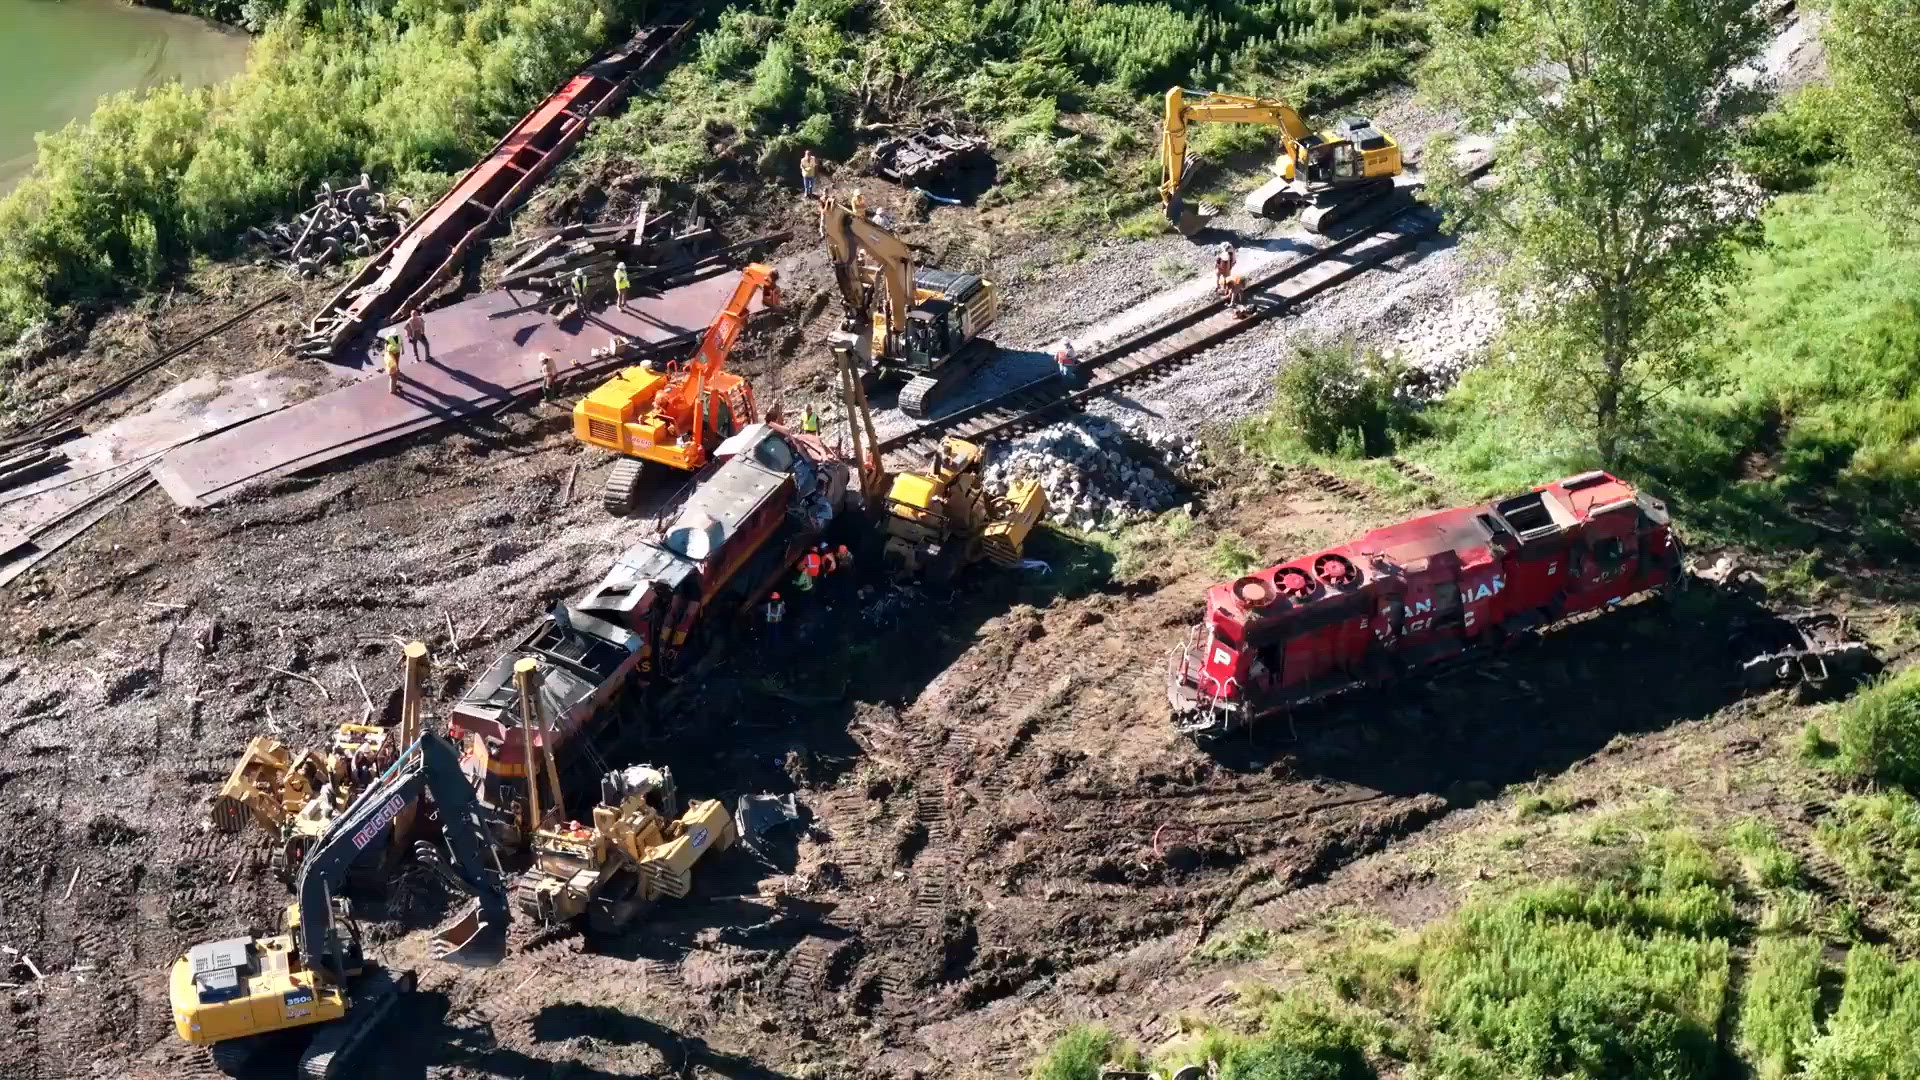 News 8 received drone video shot by Raul Arocho showing the scene after a train derailment near Midway Beach in Muscatine County.
Credit: Raul Arocho